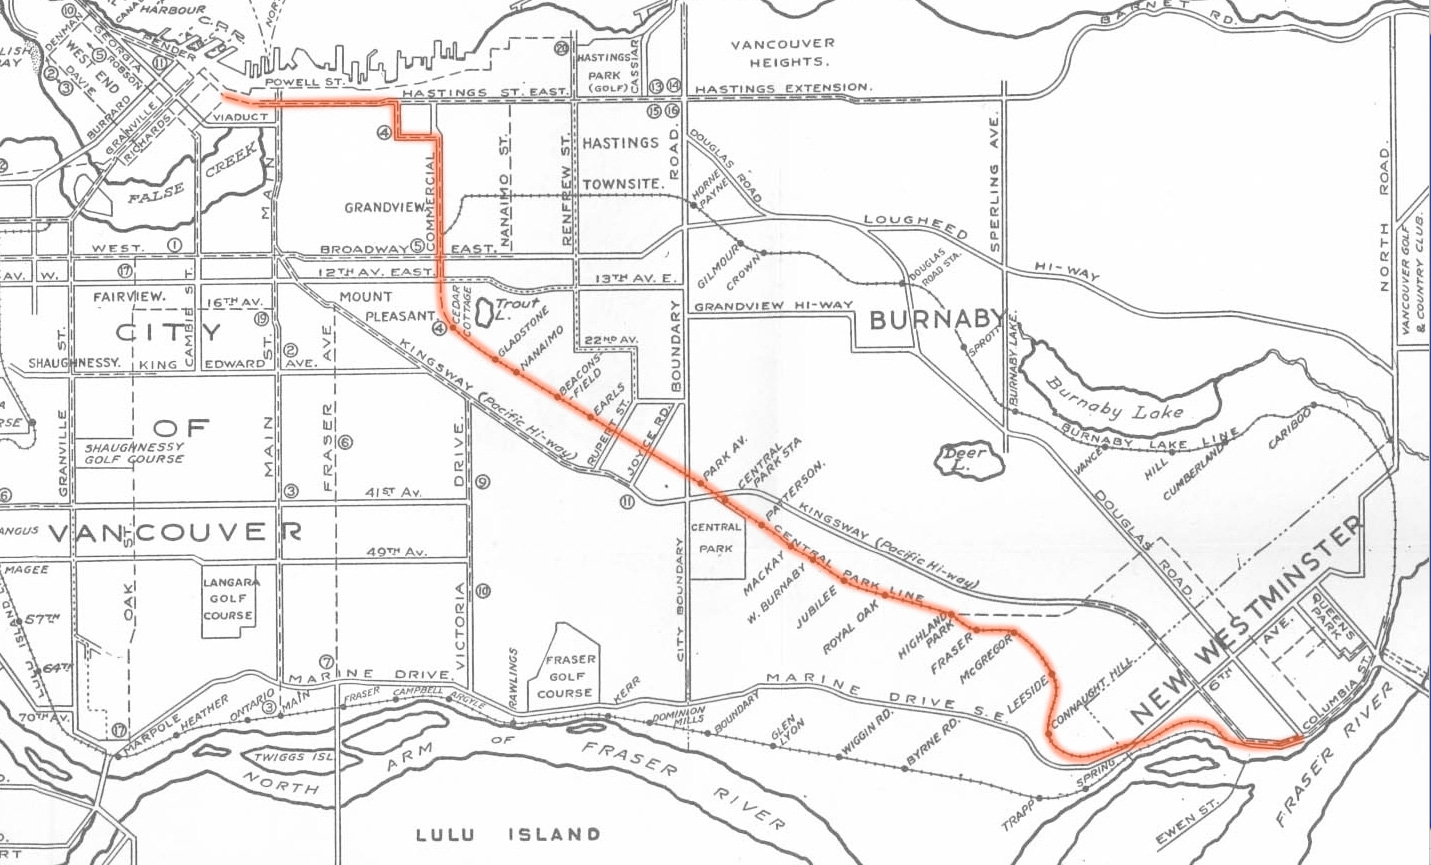 A map of the Central Park Line,  outlined on a 1936 Wrigley's transit map supplied by the <a href=http://burnabyvillagemuseum.ca/>Burnaby Village Museum</a>.